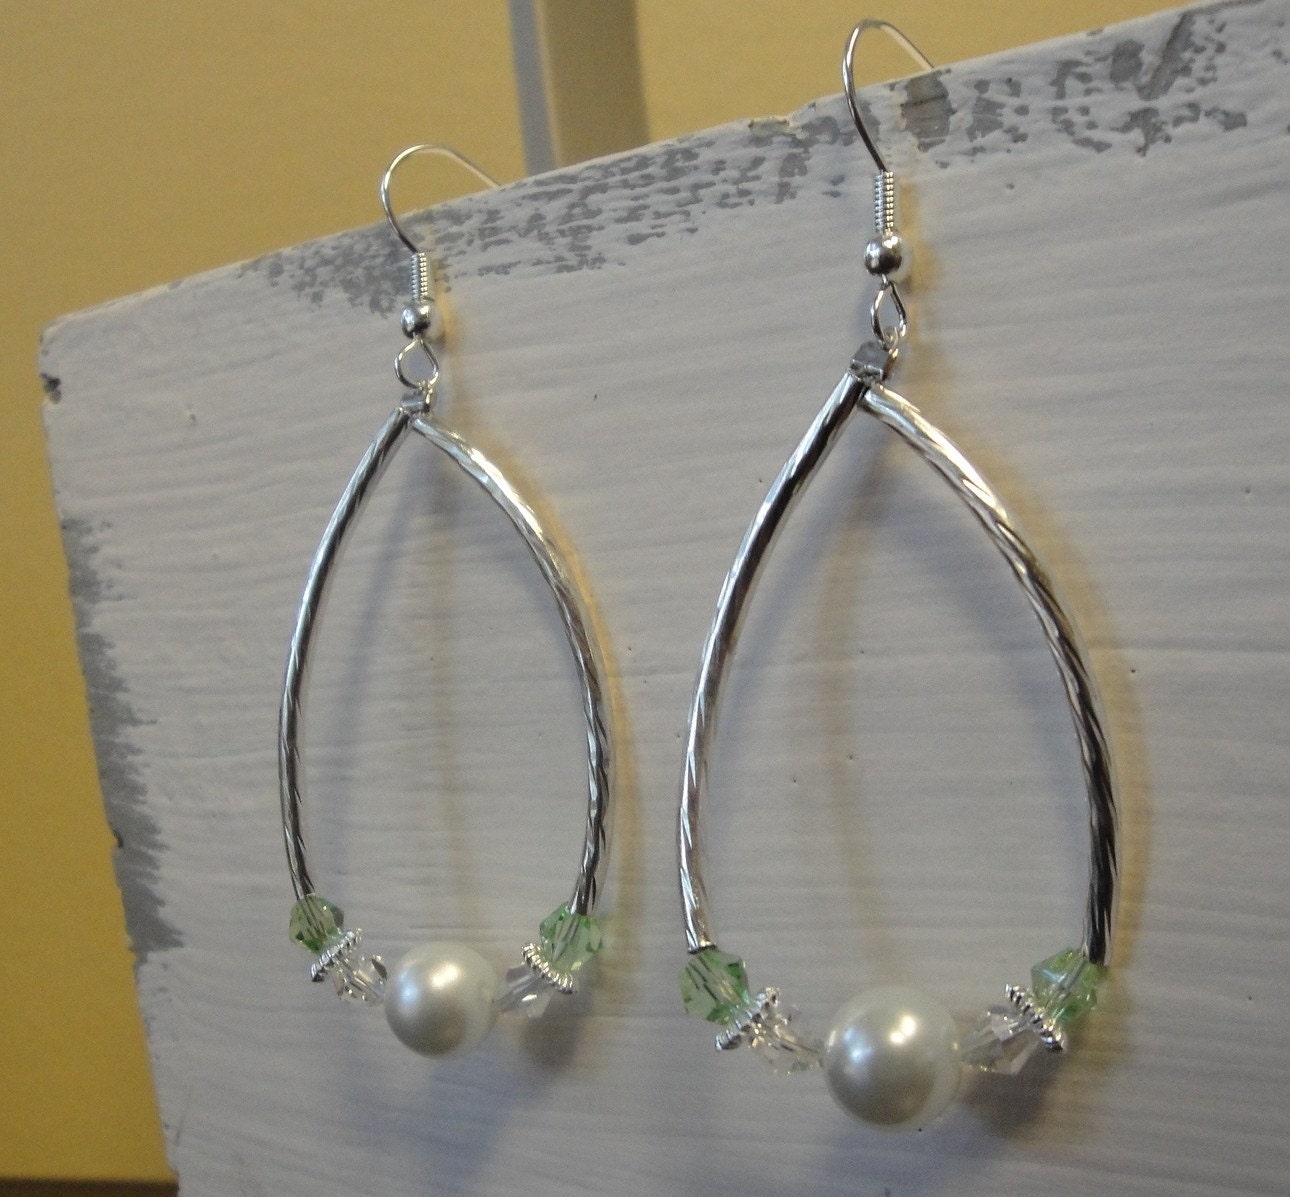 ON SALE Fancy Pearl Earrings with a touch of Green